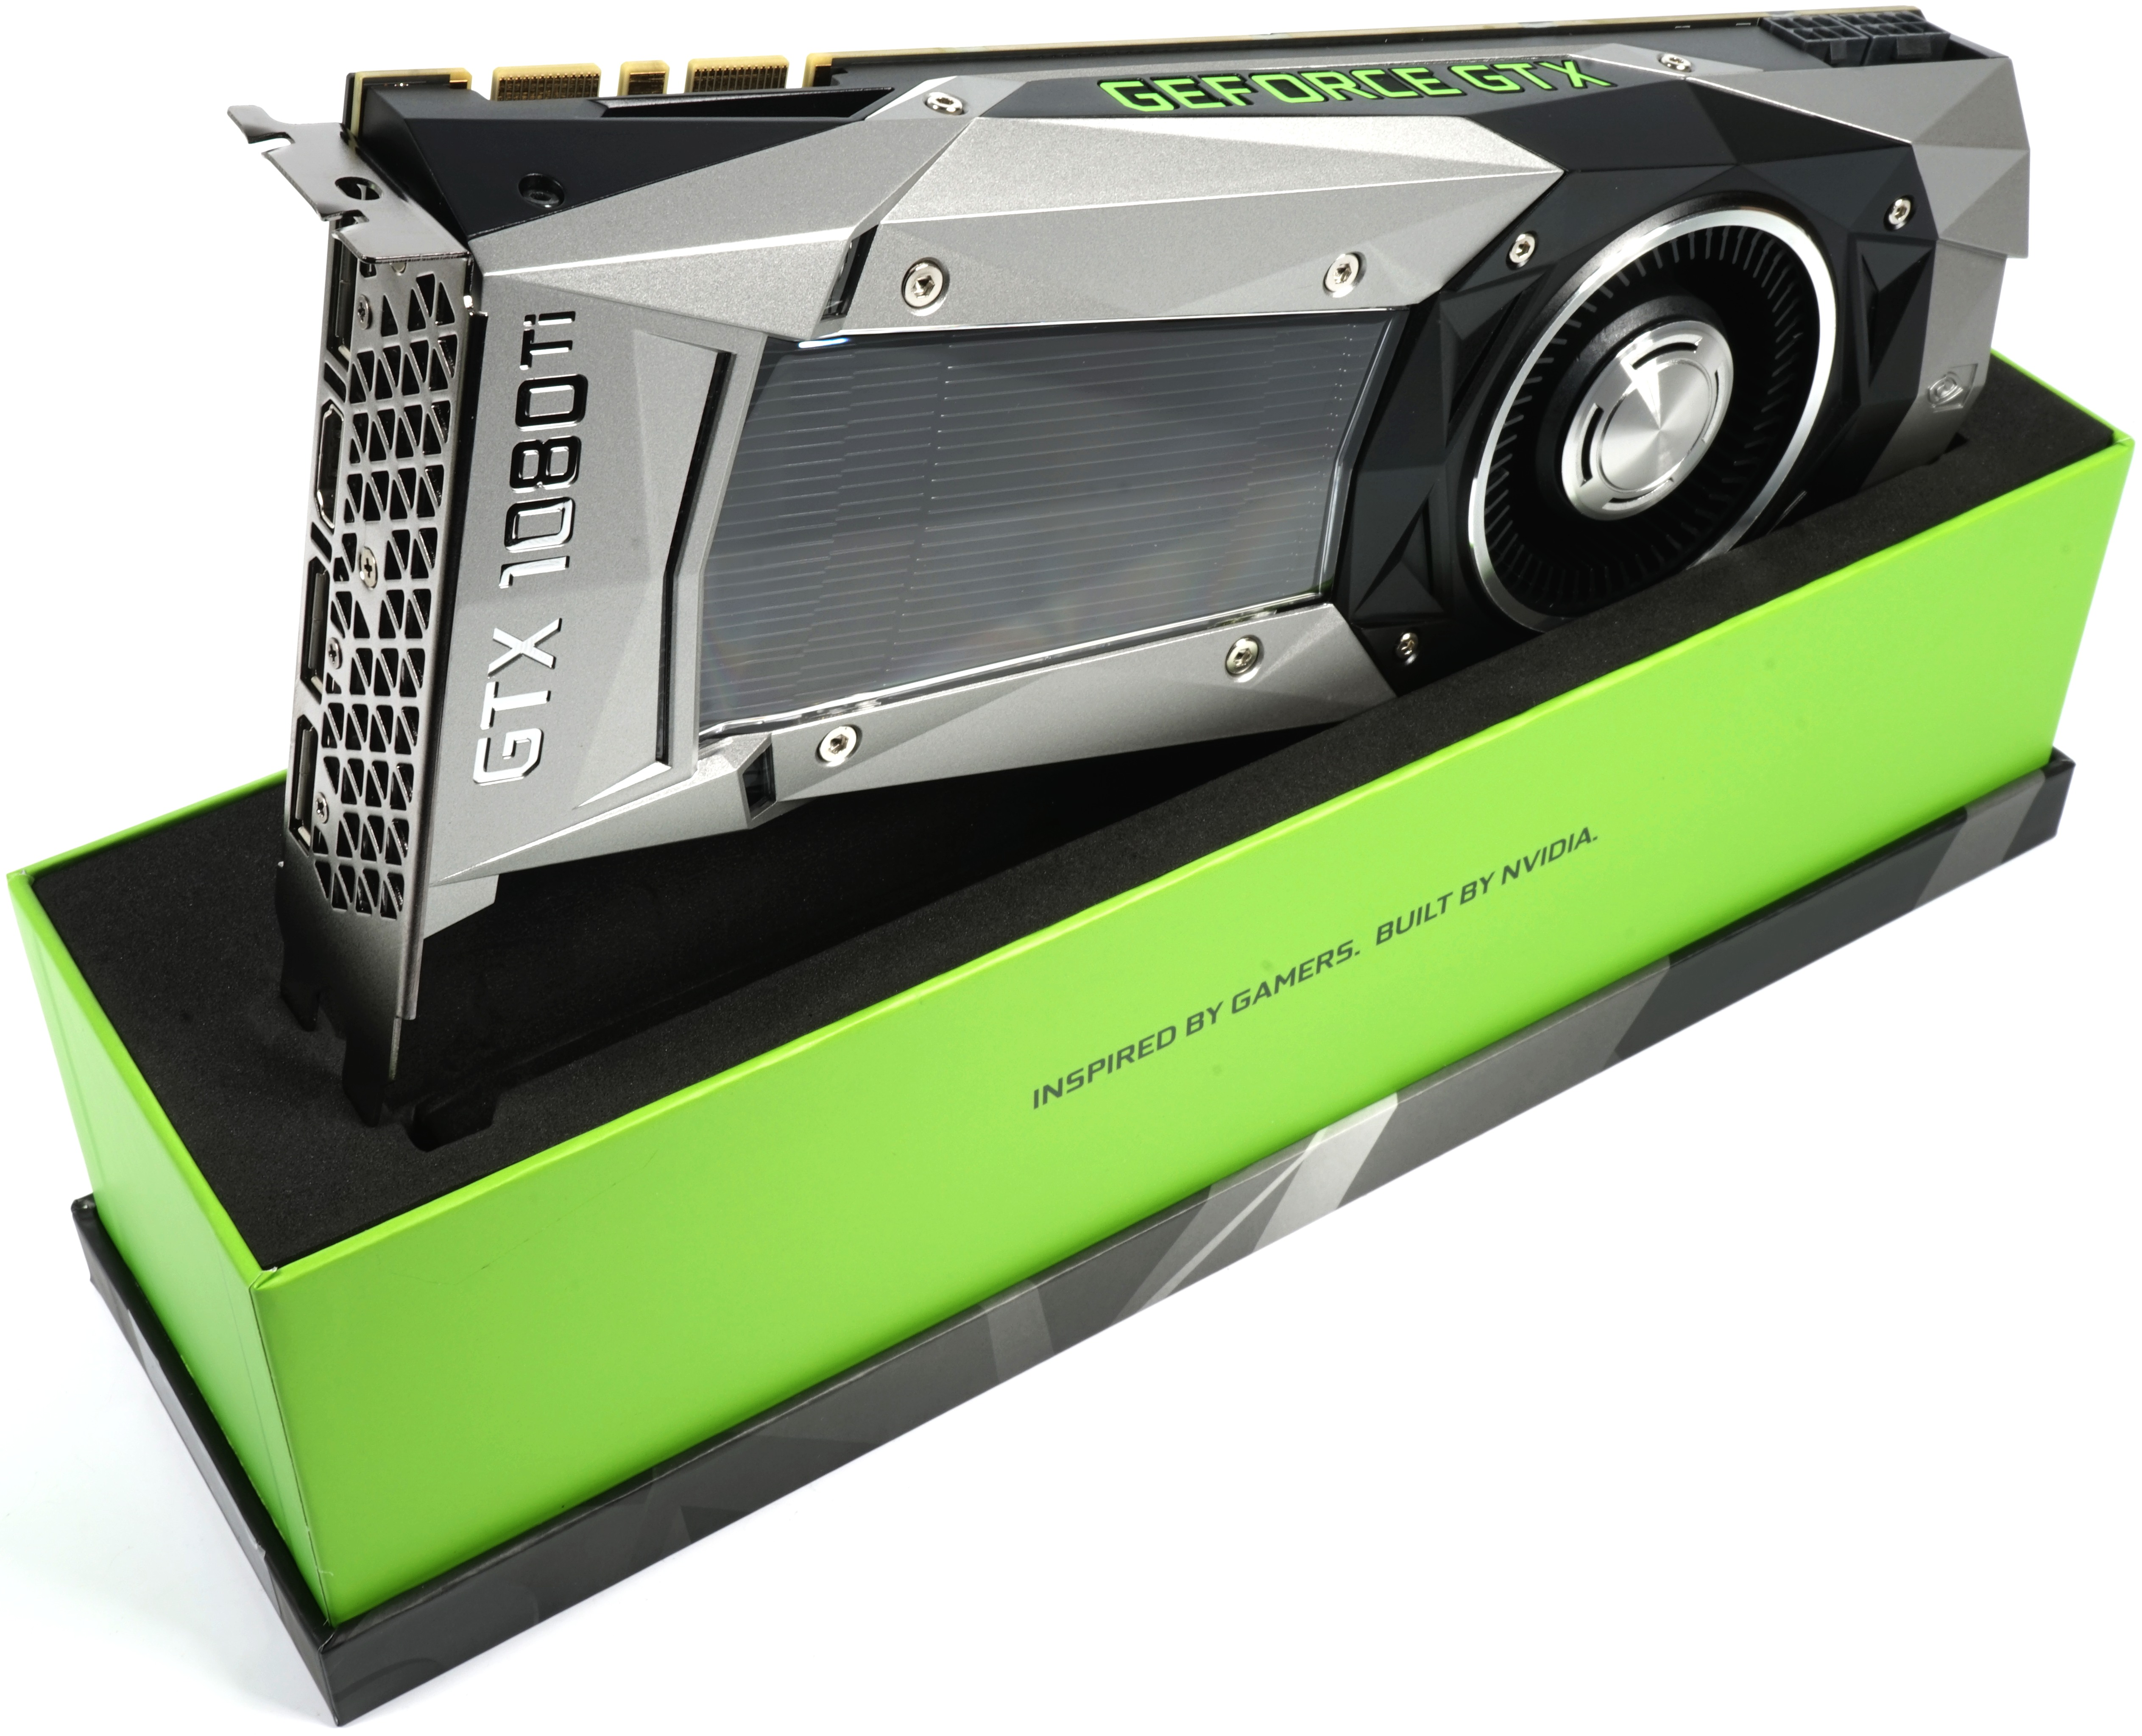 Nvidia GeForce GTX 1080 Ti: Unboxing packaging and board | igor´sLAB